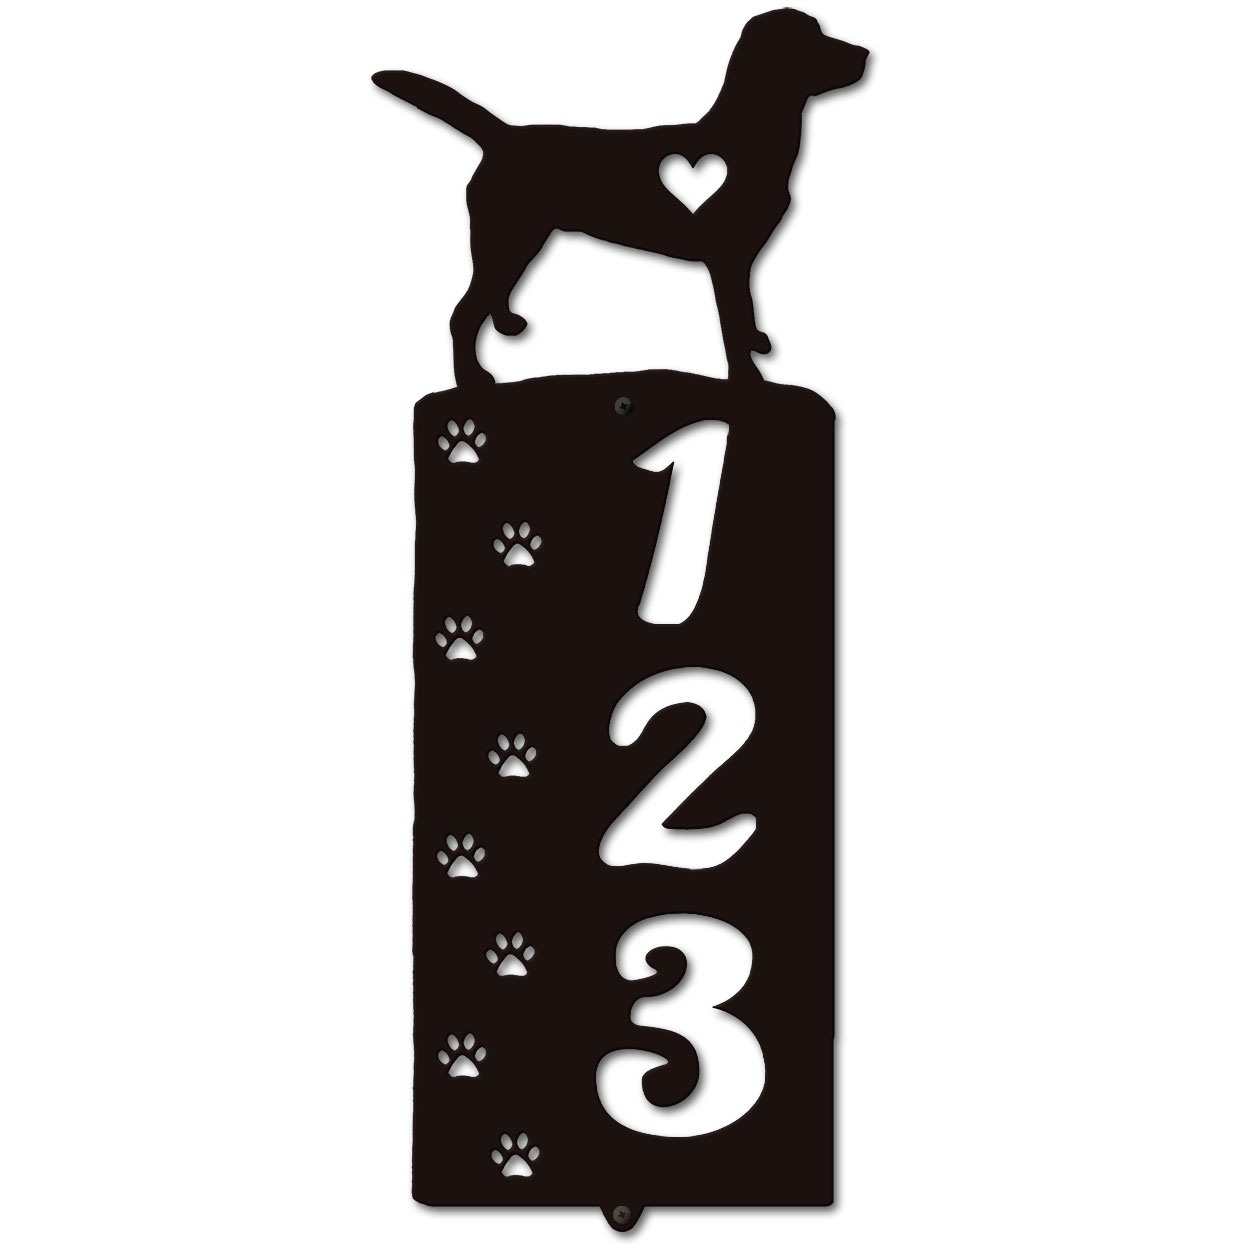 636263 - Labrador Cut Outs Three Digit Address Number Plaque